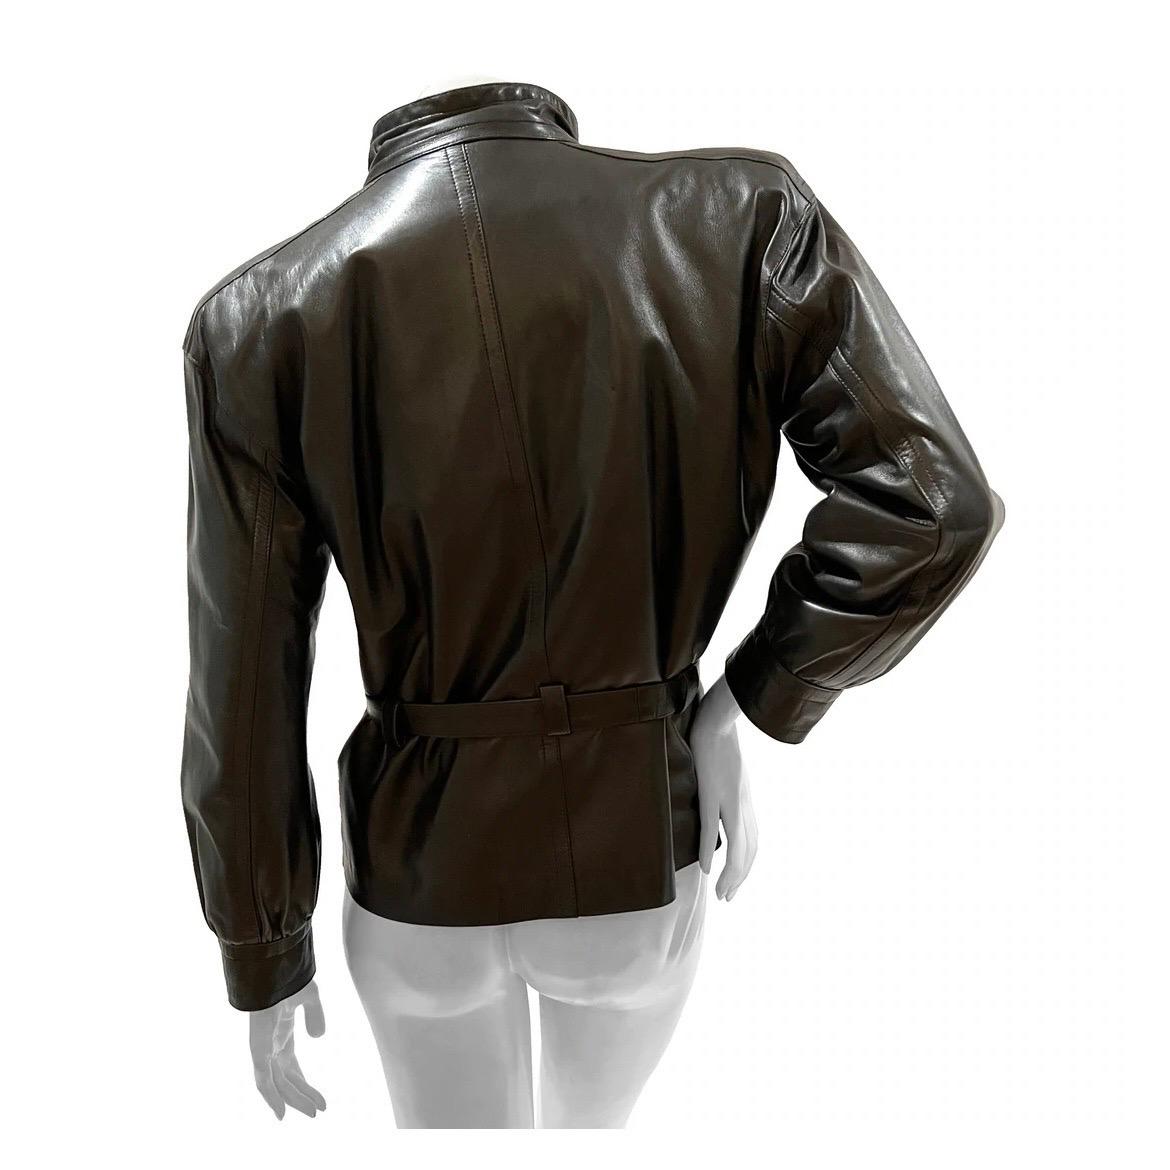 Yves Saint Laurent Fourrures Leather Coat 
Vintage 
Circa 1980's 
Made in France 
Chocolate brown leather 
Mock neck style collar 
Button at collar for closure 
Zipper down front of jacket 
Two flap pockets with round silver-tone button for closure